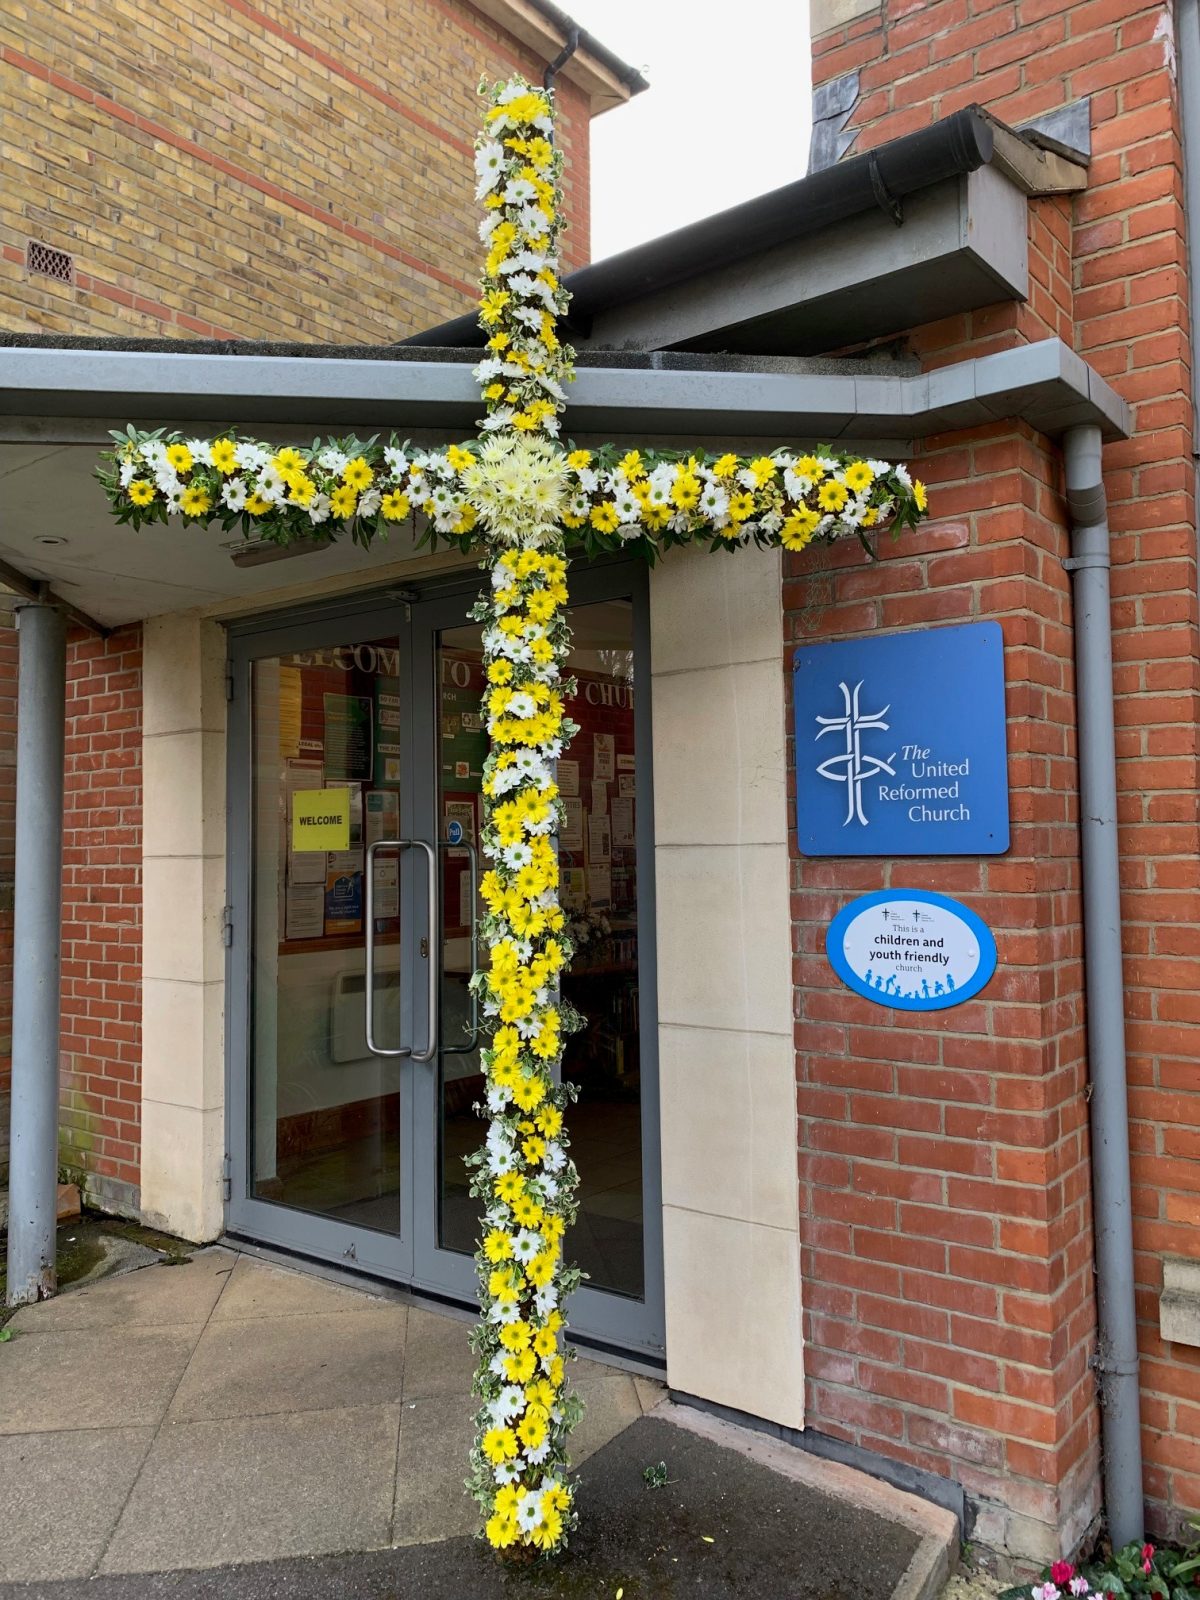 A Cross of yellow and white flowers outside the church entrance.